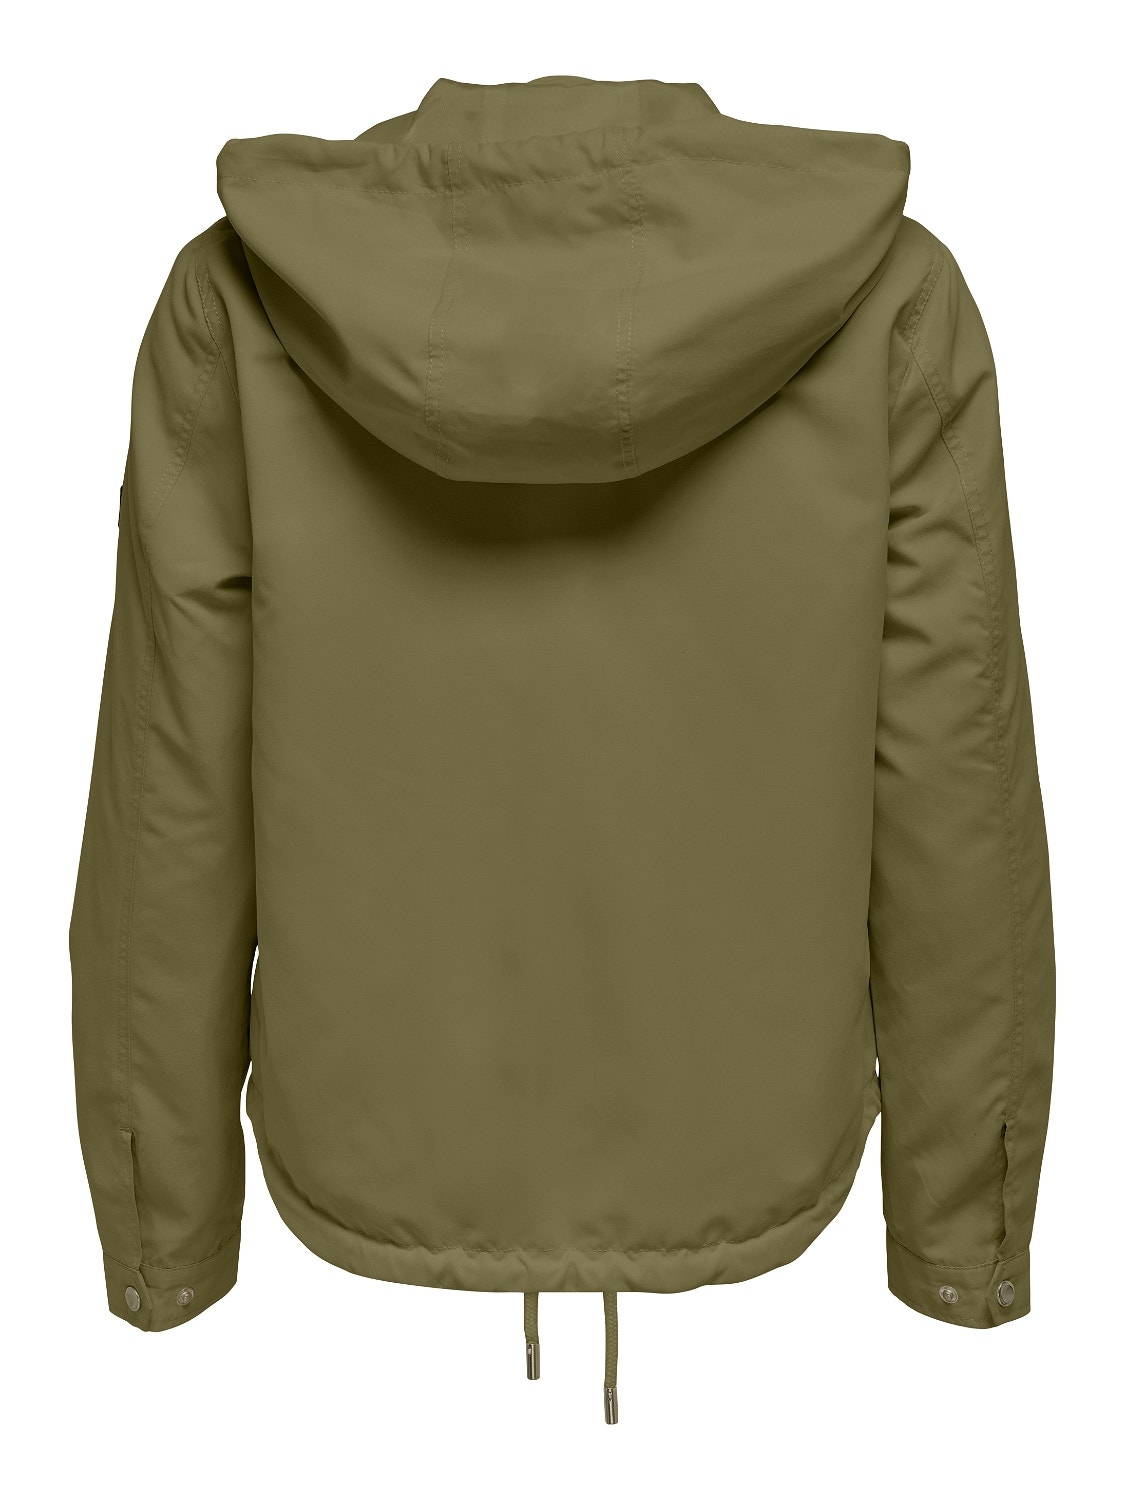 ONLY Jacket -Olive Drab - 15228627